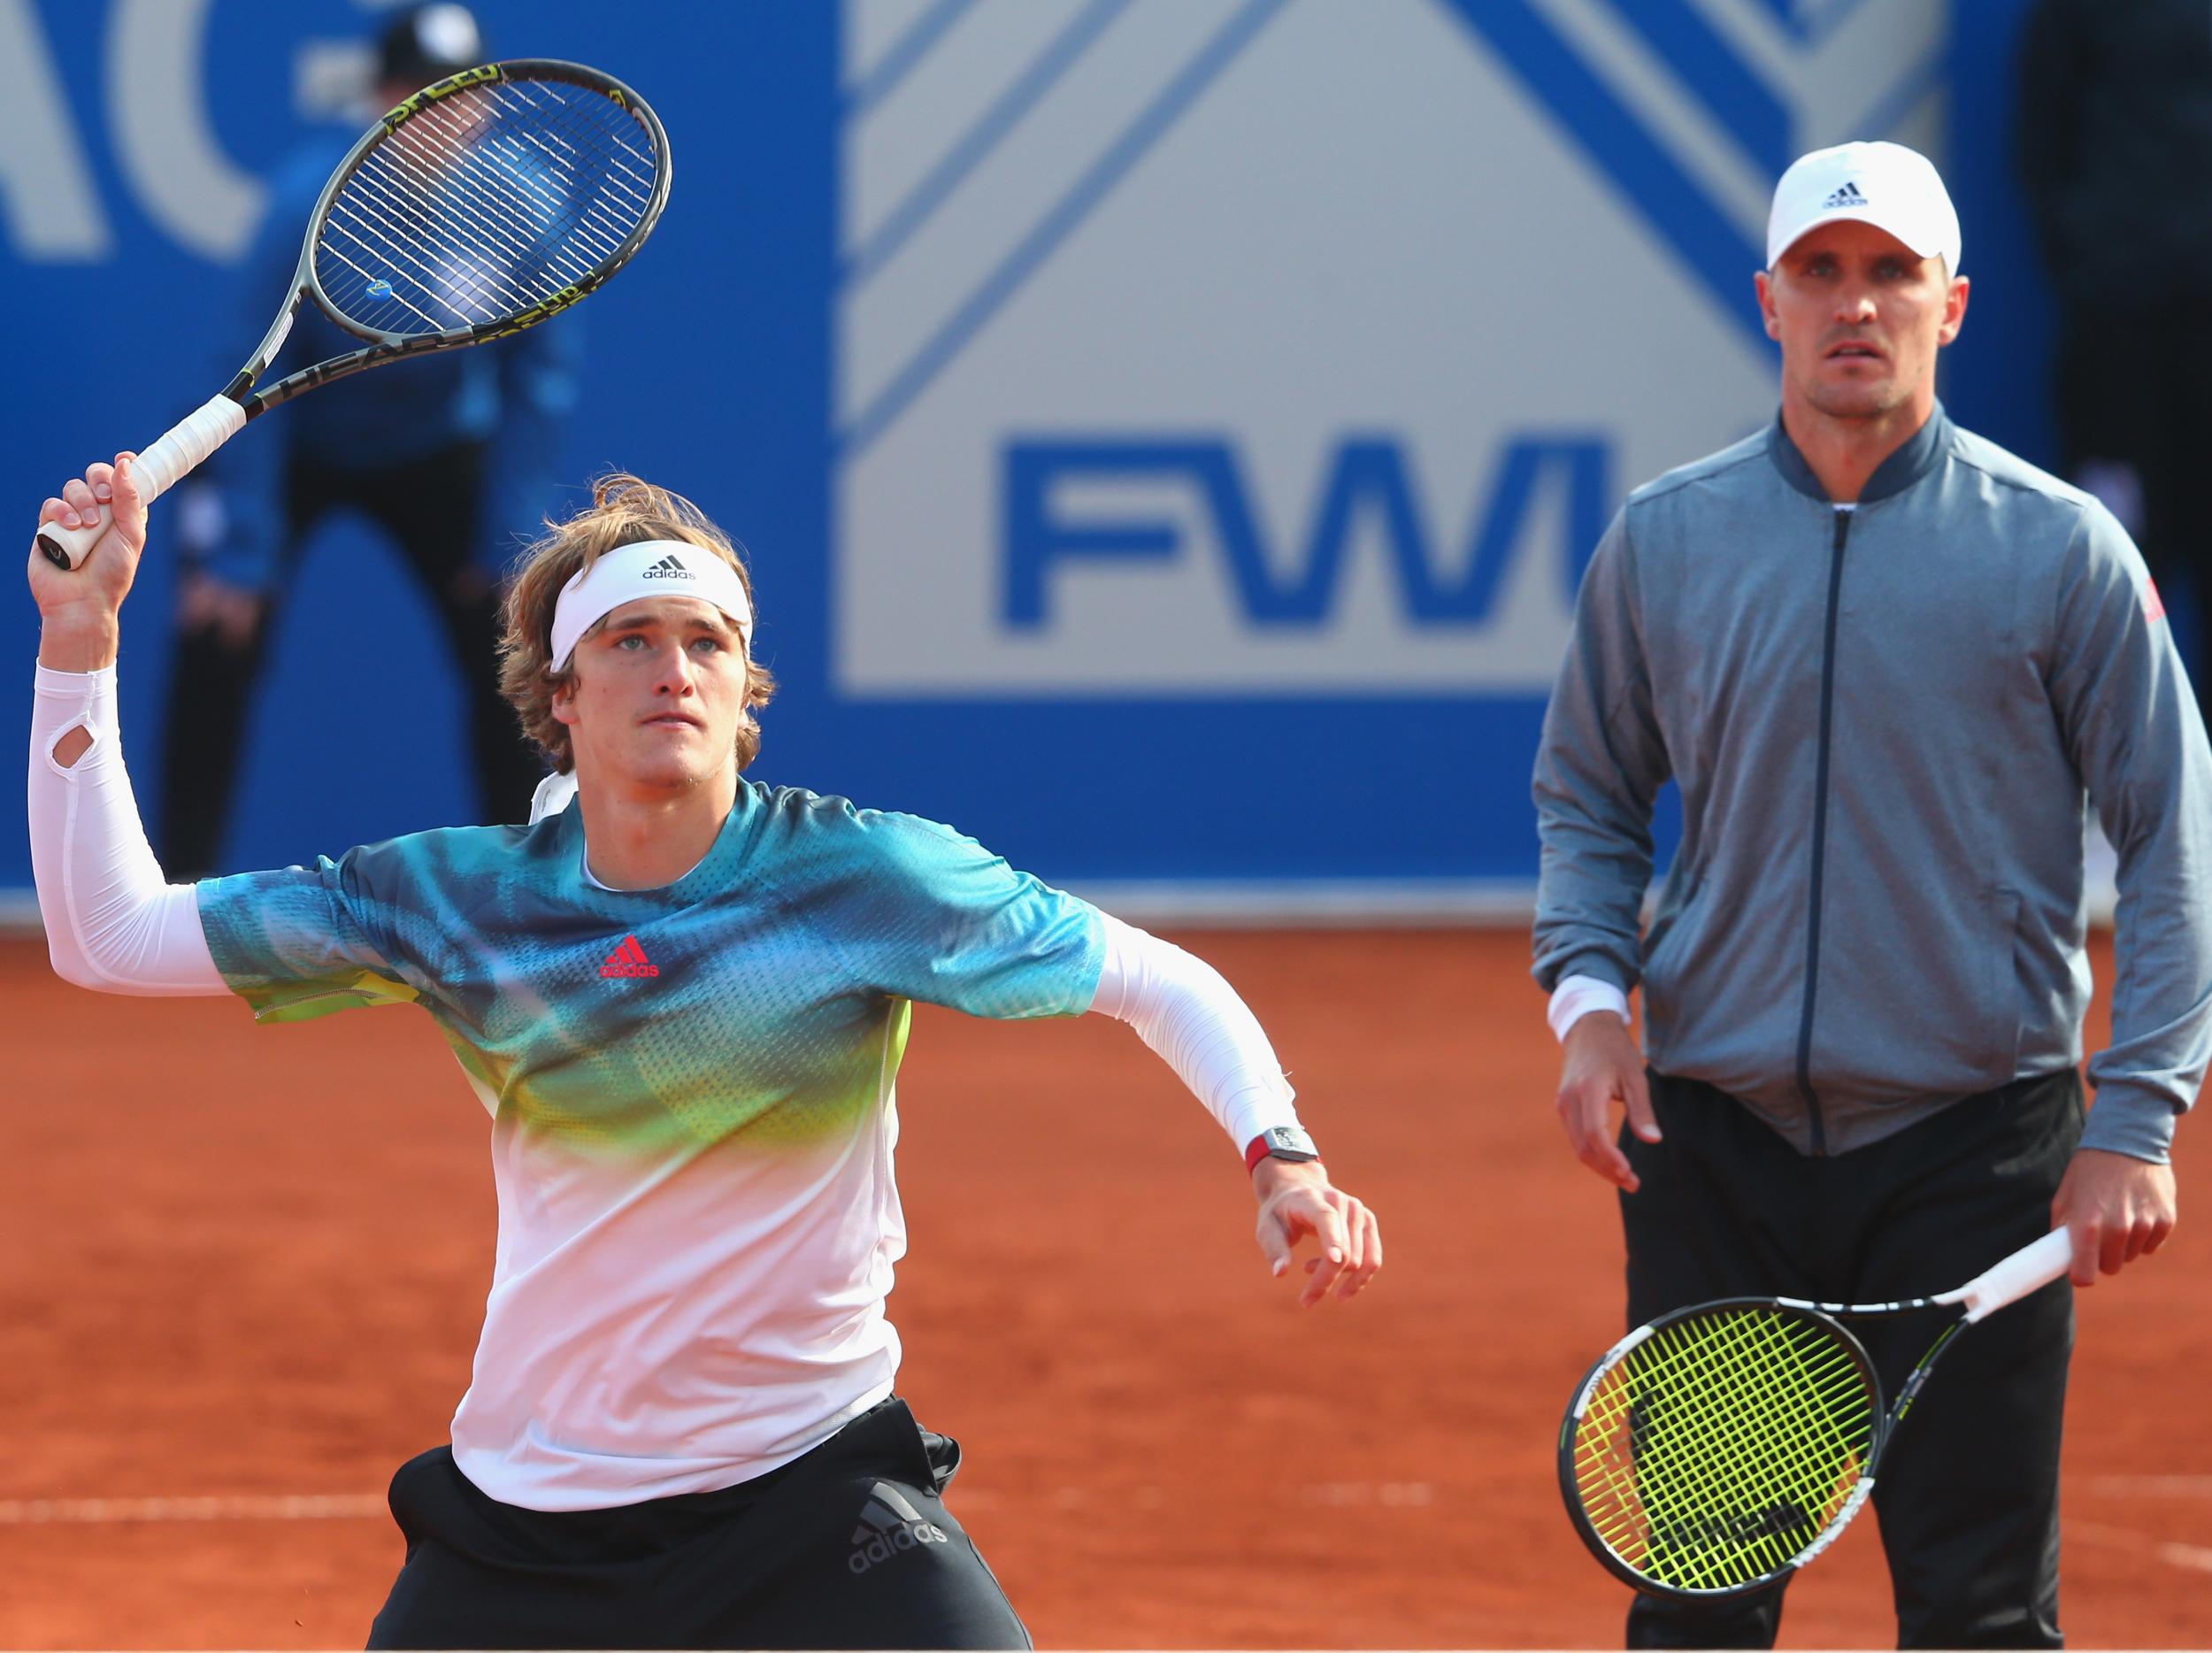 The Zverev brothers together on court